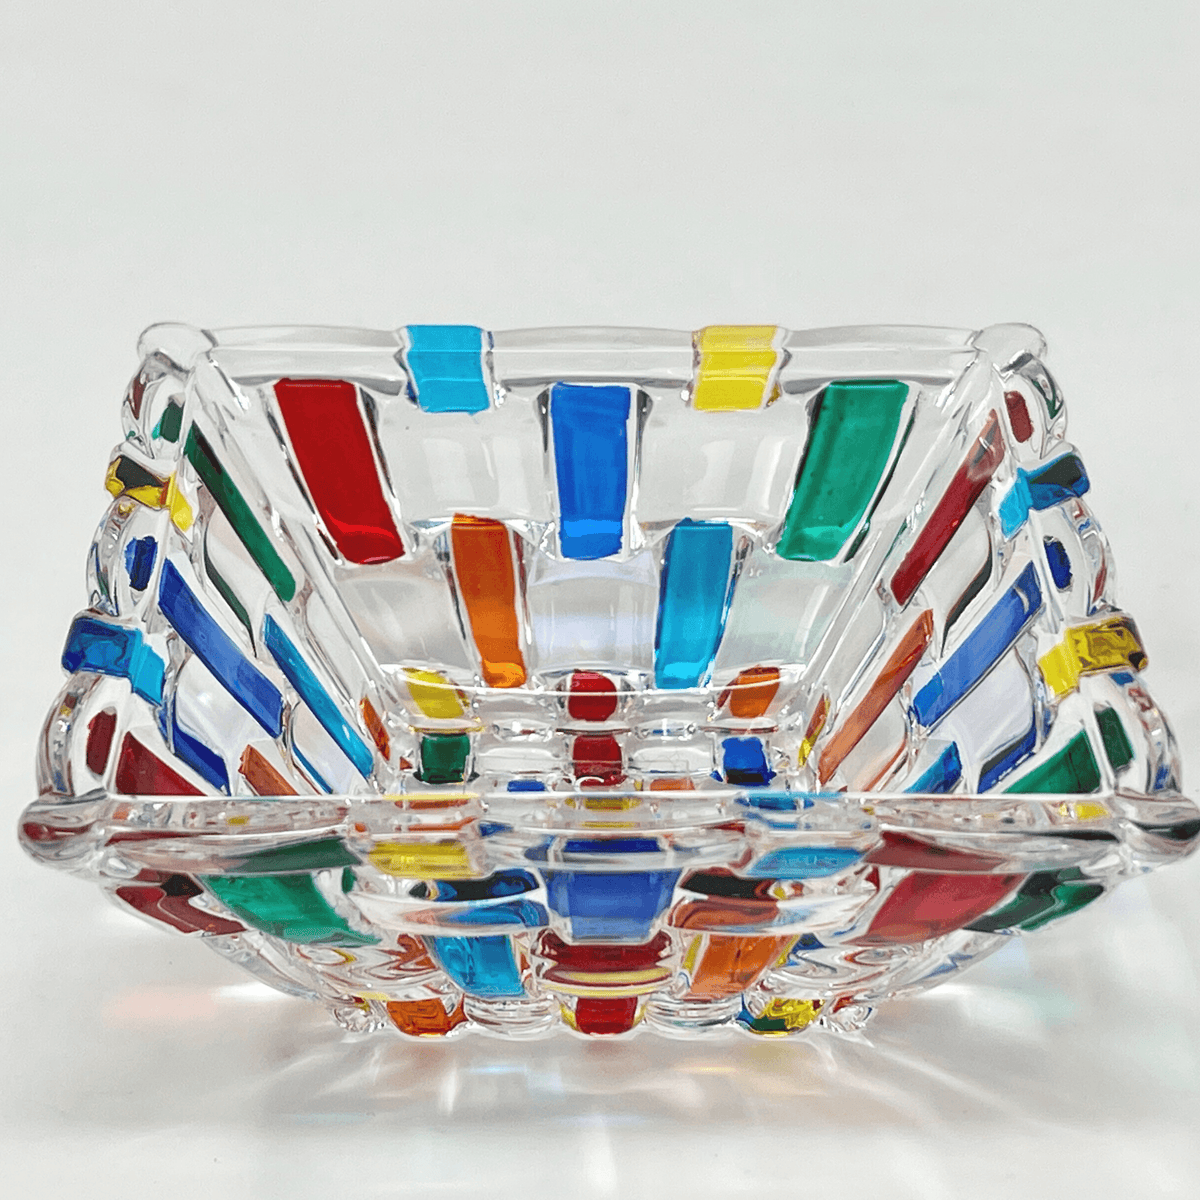 Bossanova Glass Square Bowl, Small, Hand Painted Crystal, Made in Italy at MyItalianDecor